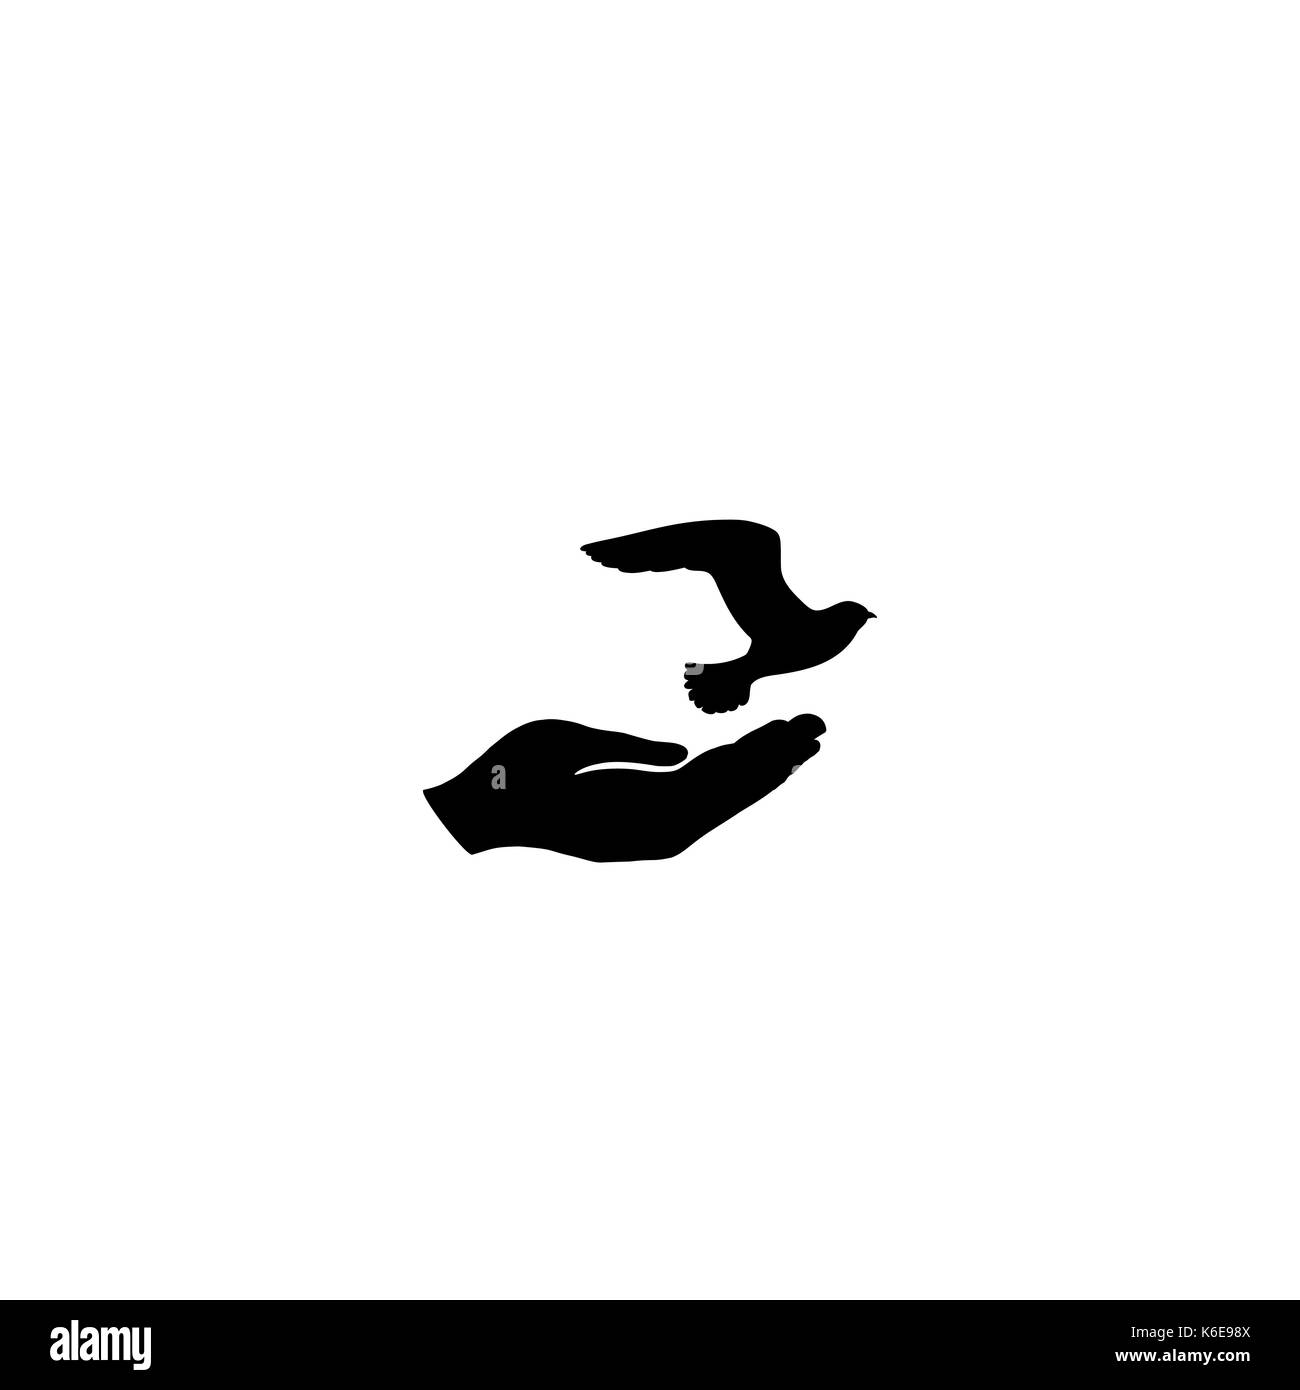 Dove bird free with hand. Bird flying. Peace symbol. Pigeon and hand silhouette. freedom sign. Stock Vector